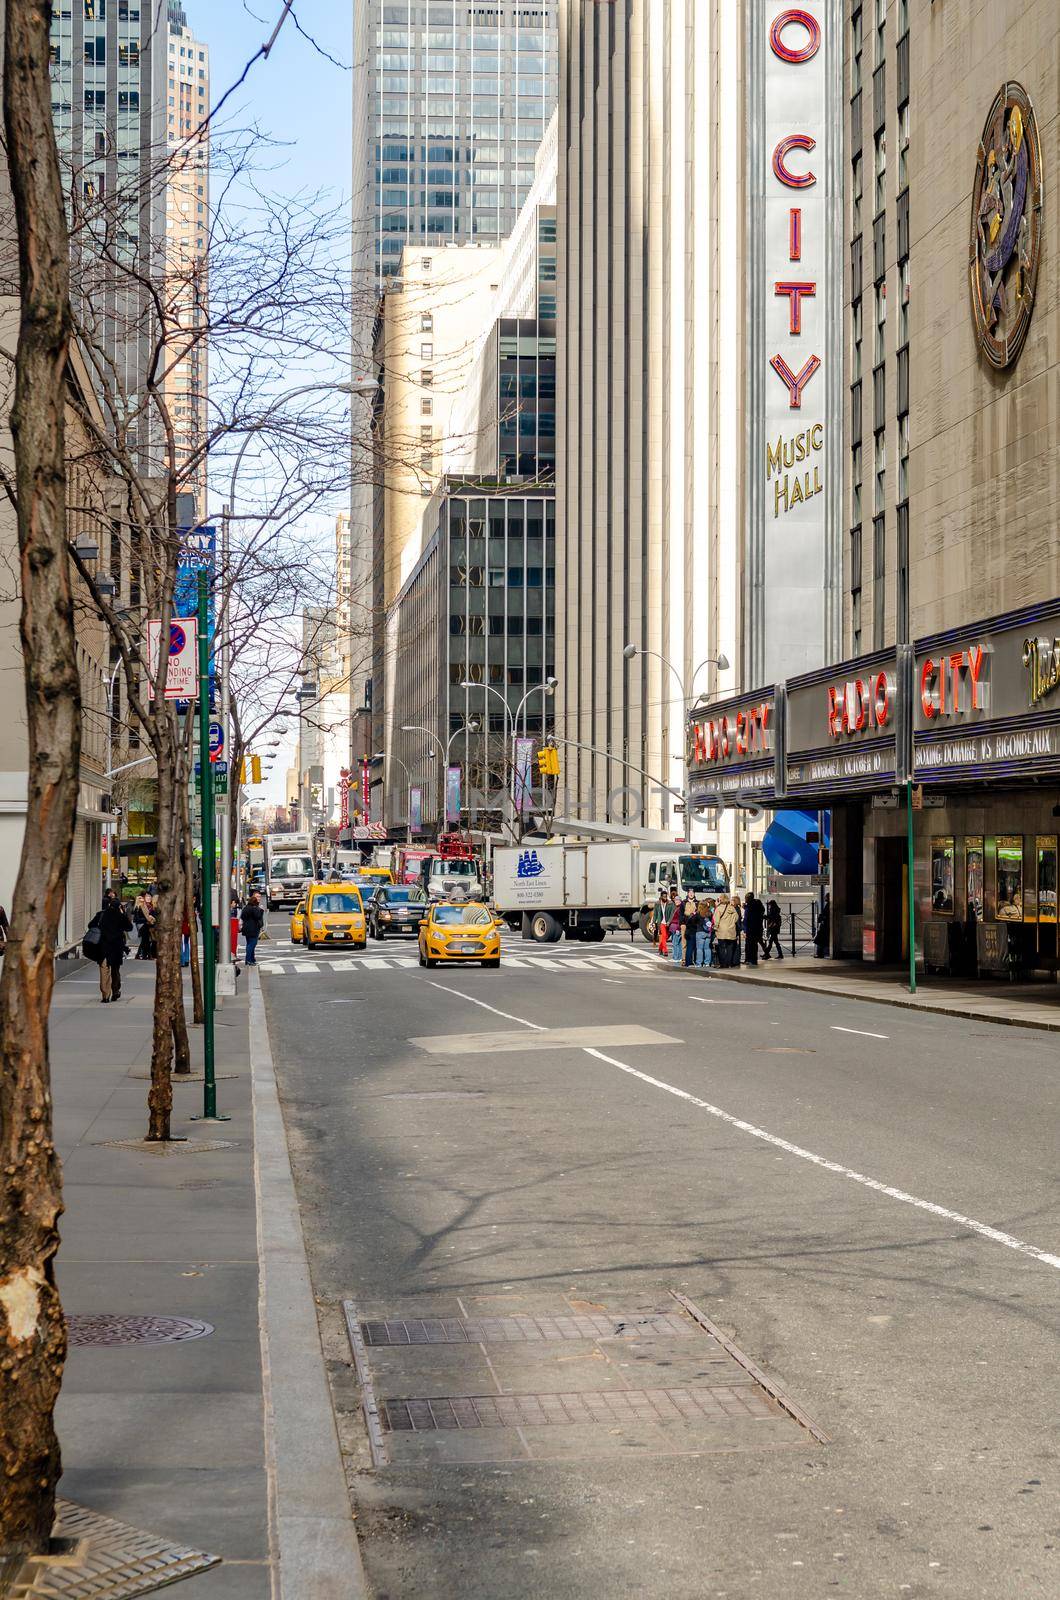 Radio City Music Hall, New York City with street and traffic in forefront by bildgigant